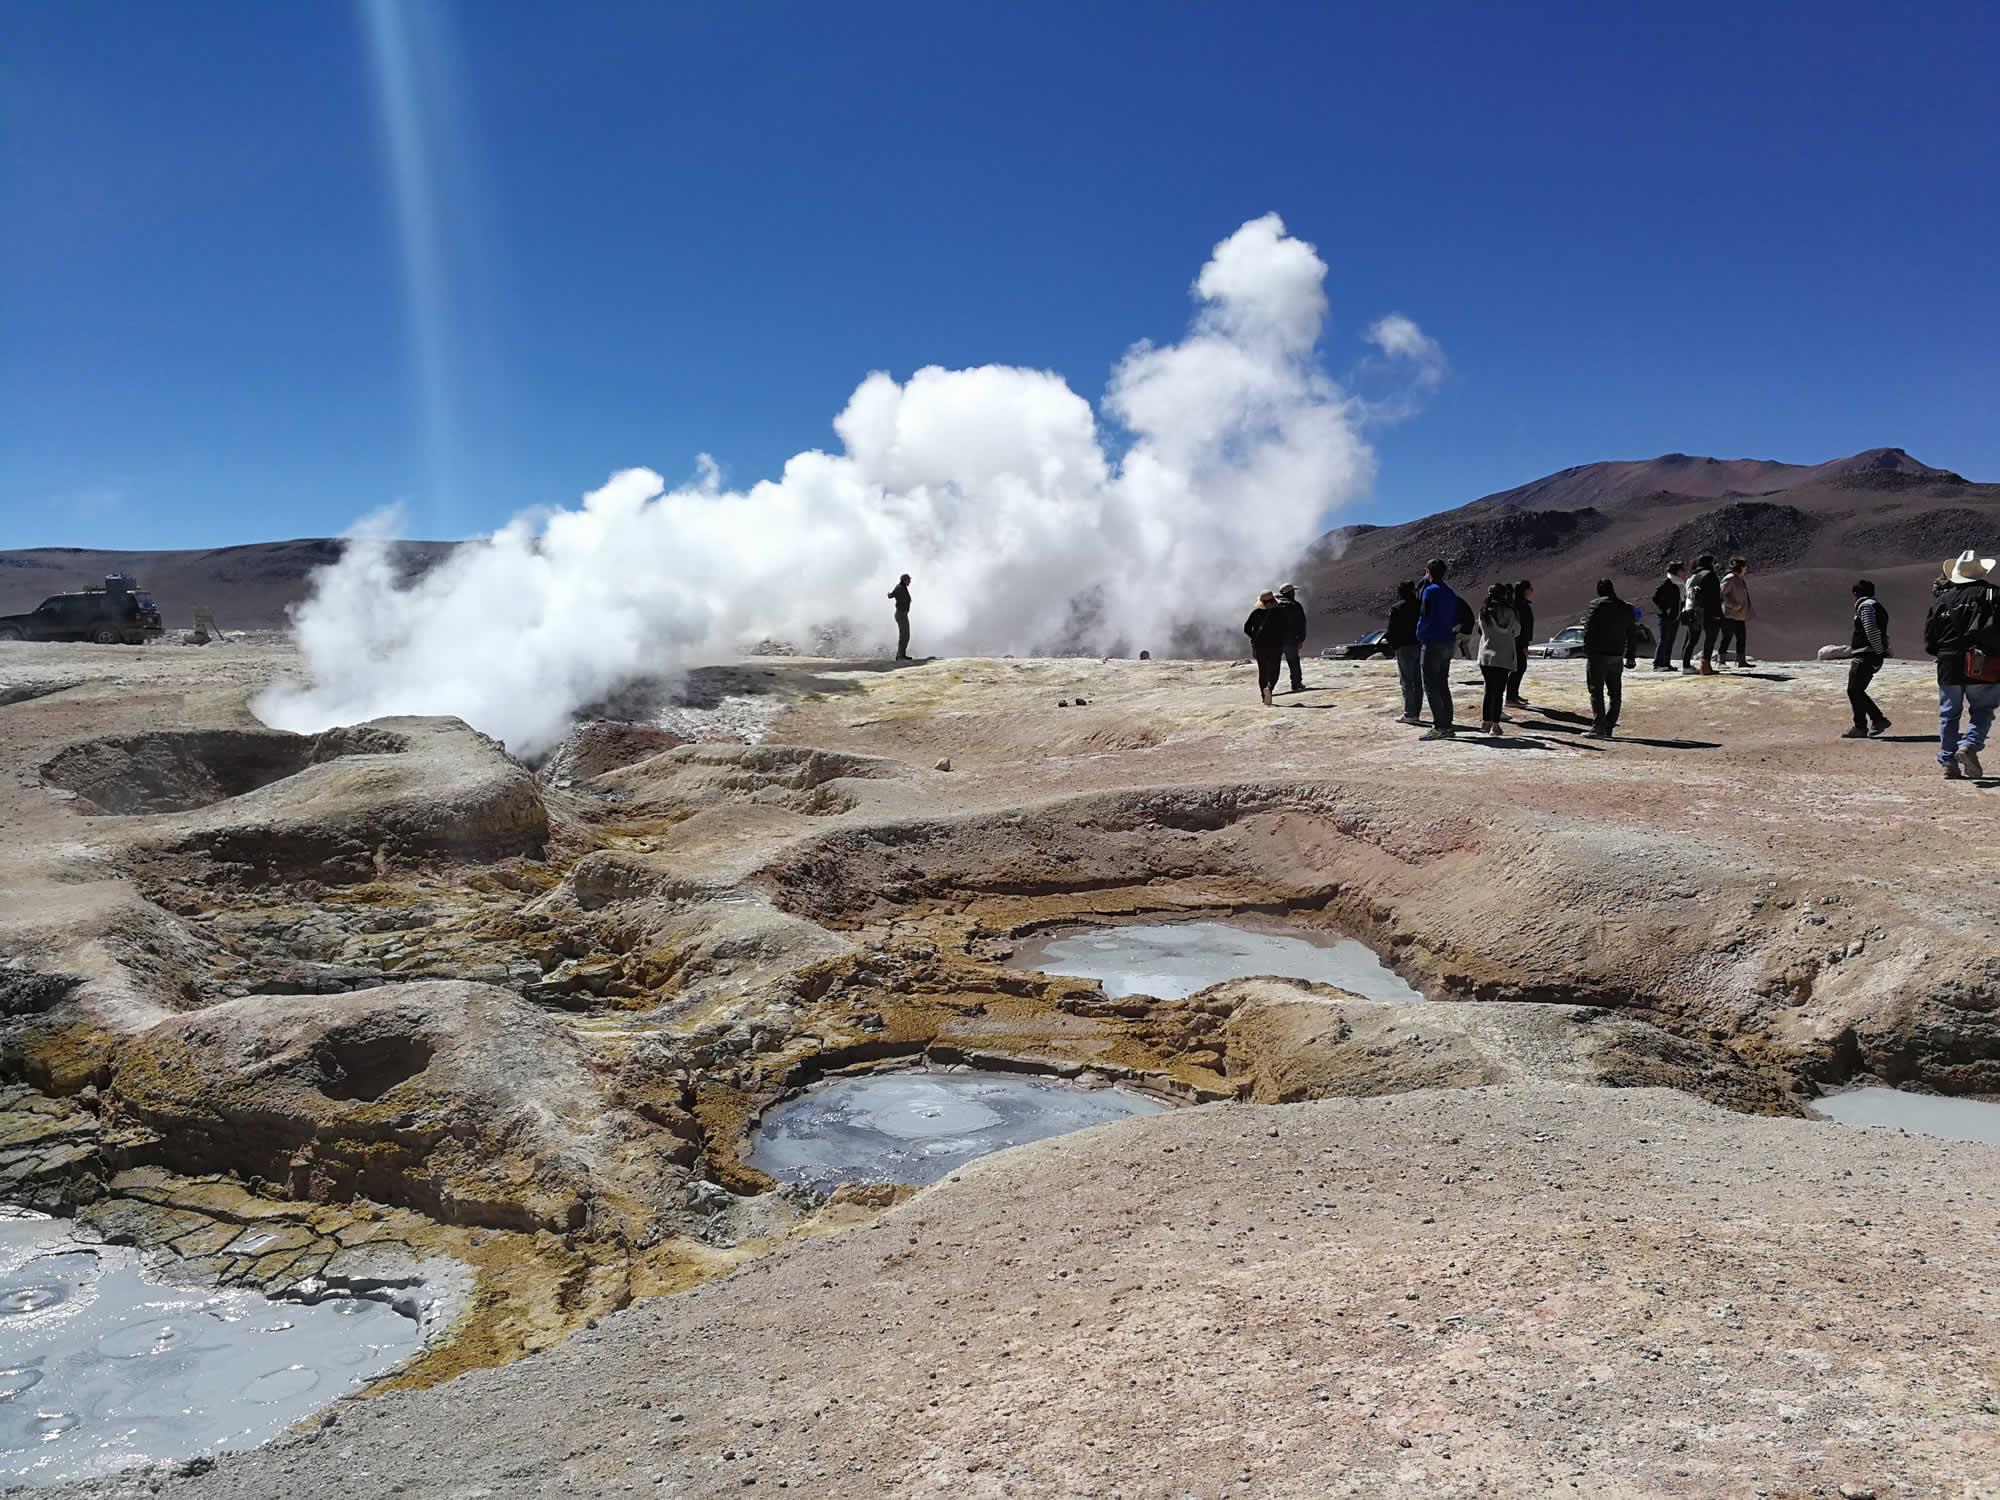 Thermal waters and geysers